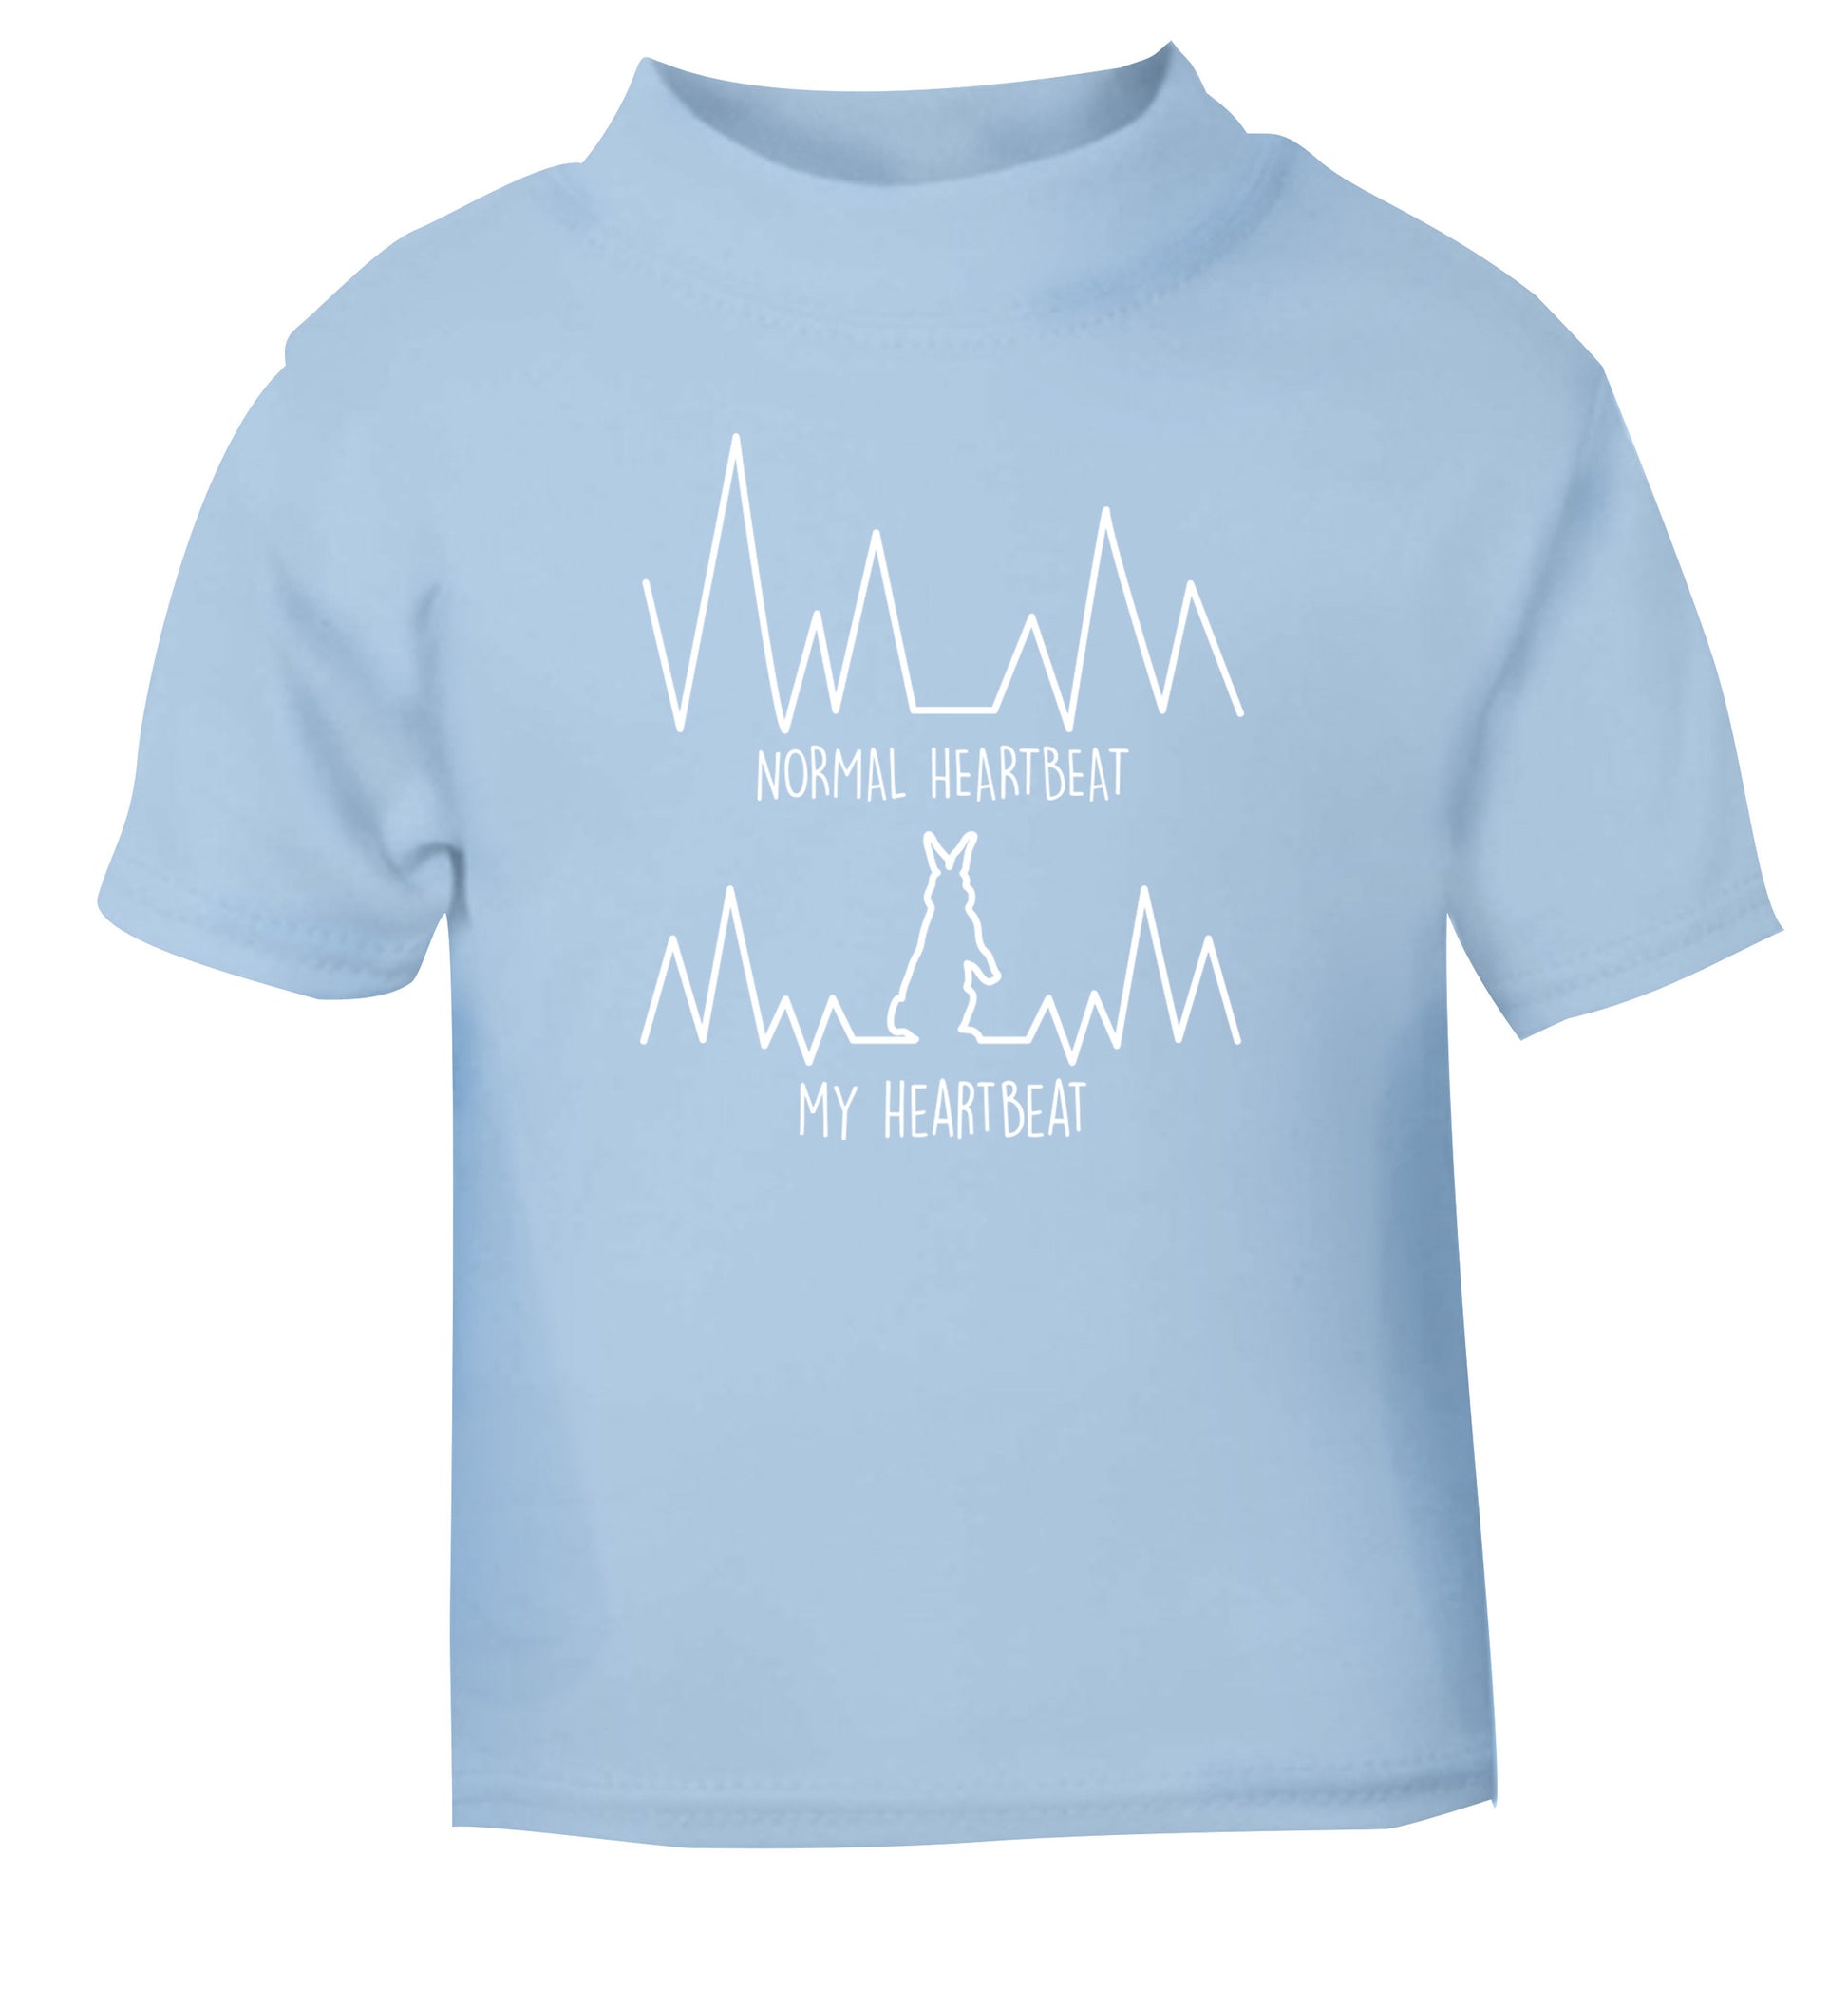 Normal heartbeat, my heartbeat rabbit lover light blue Baby Toddler Tshirt 2 Years